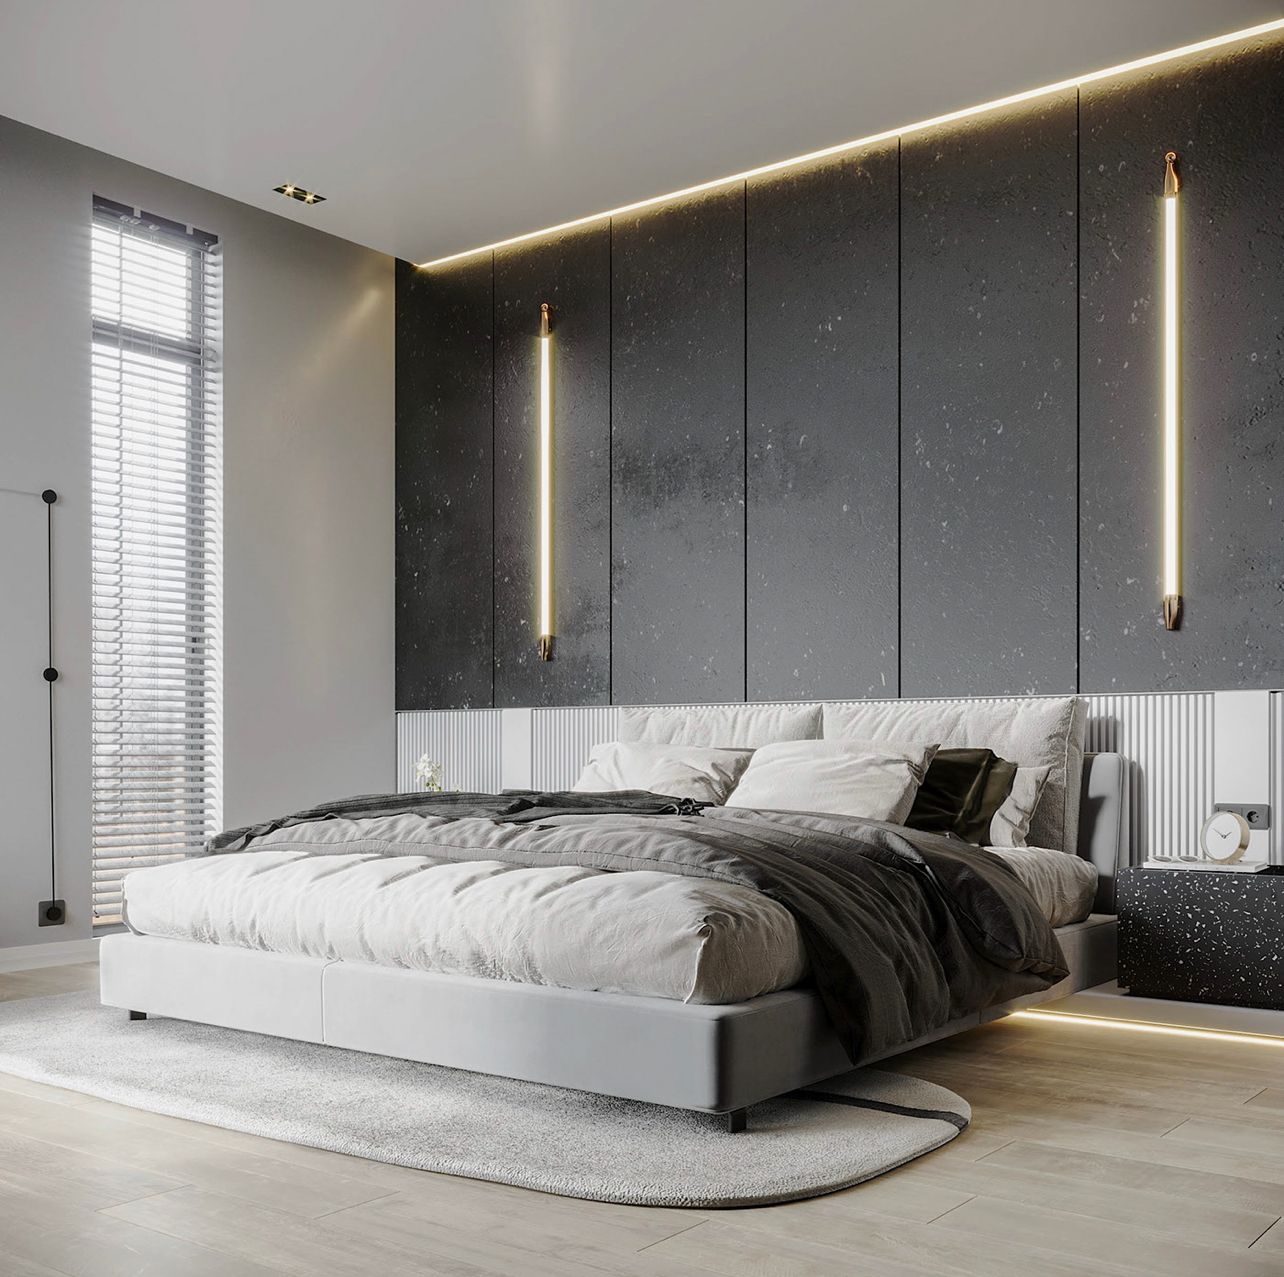 Modern Bed Egypt, Modern BedrooM pIctures In Egypt, Modern BedrooM desIgn In CaIro, Luxury BedrooM pIctures Egypt, Modren Luxury BedrooMs In CaIro